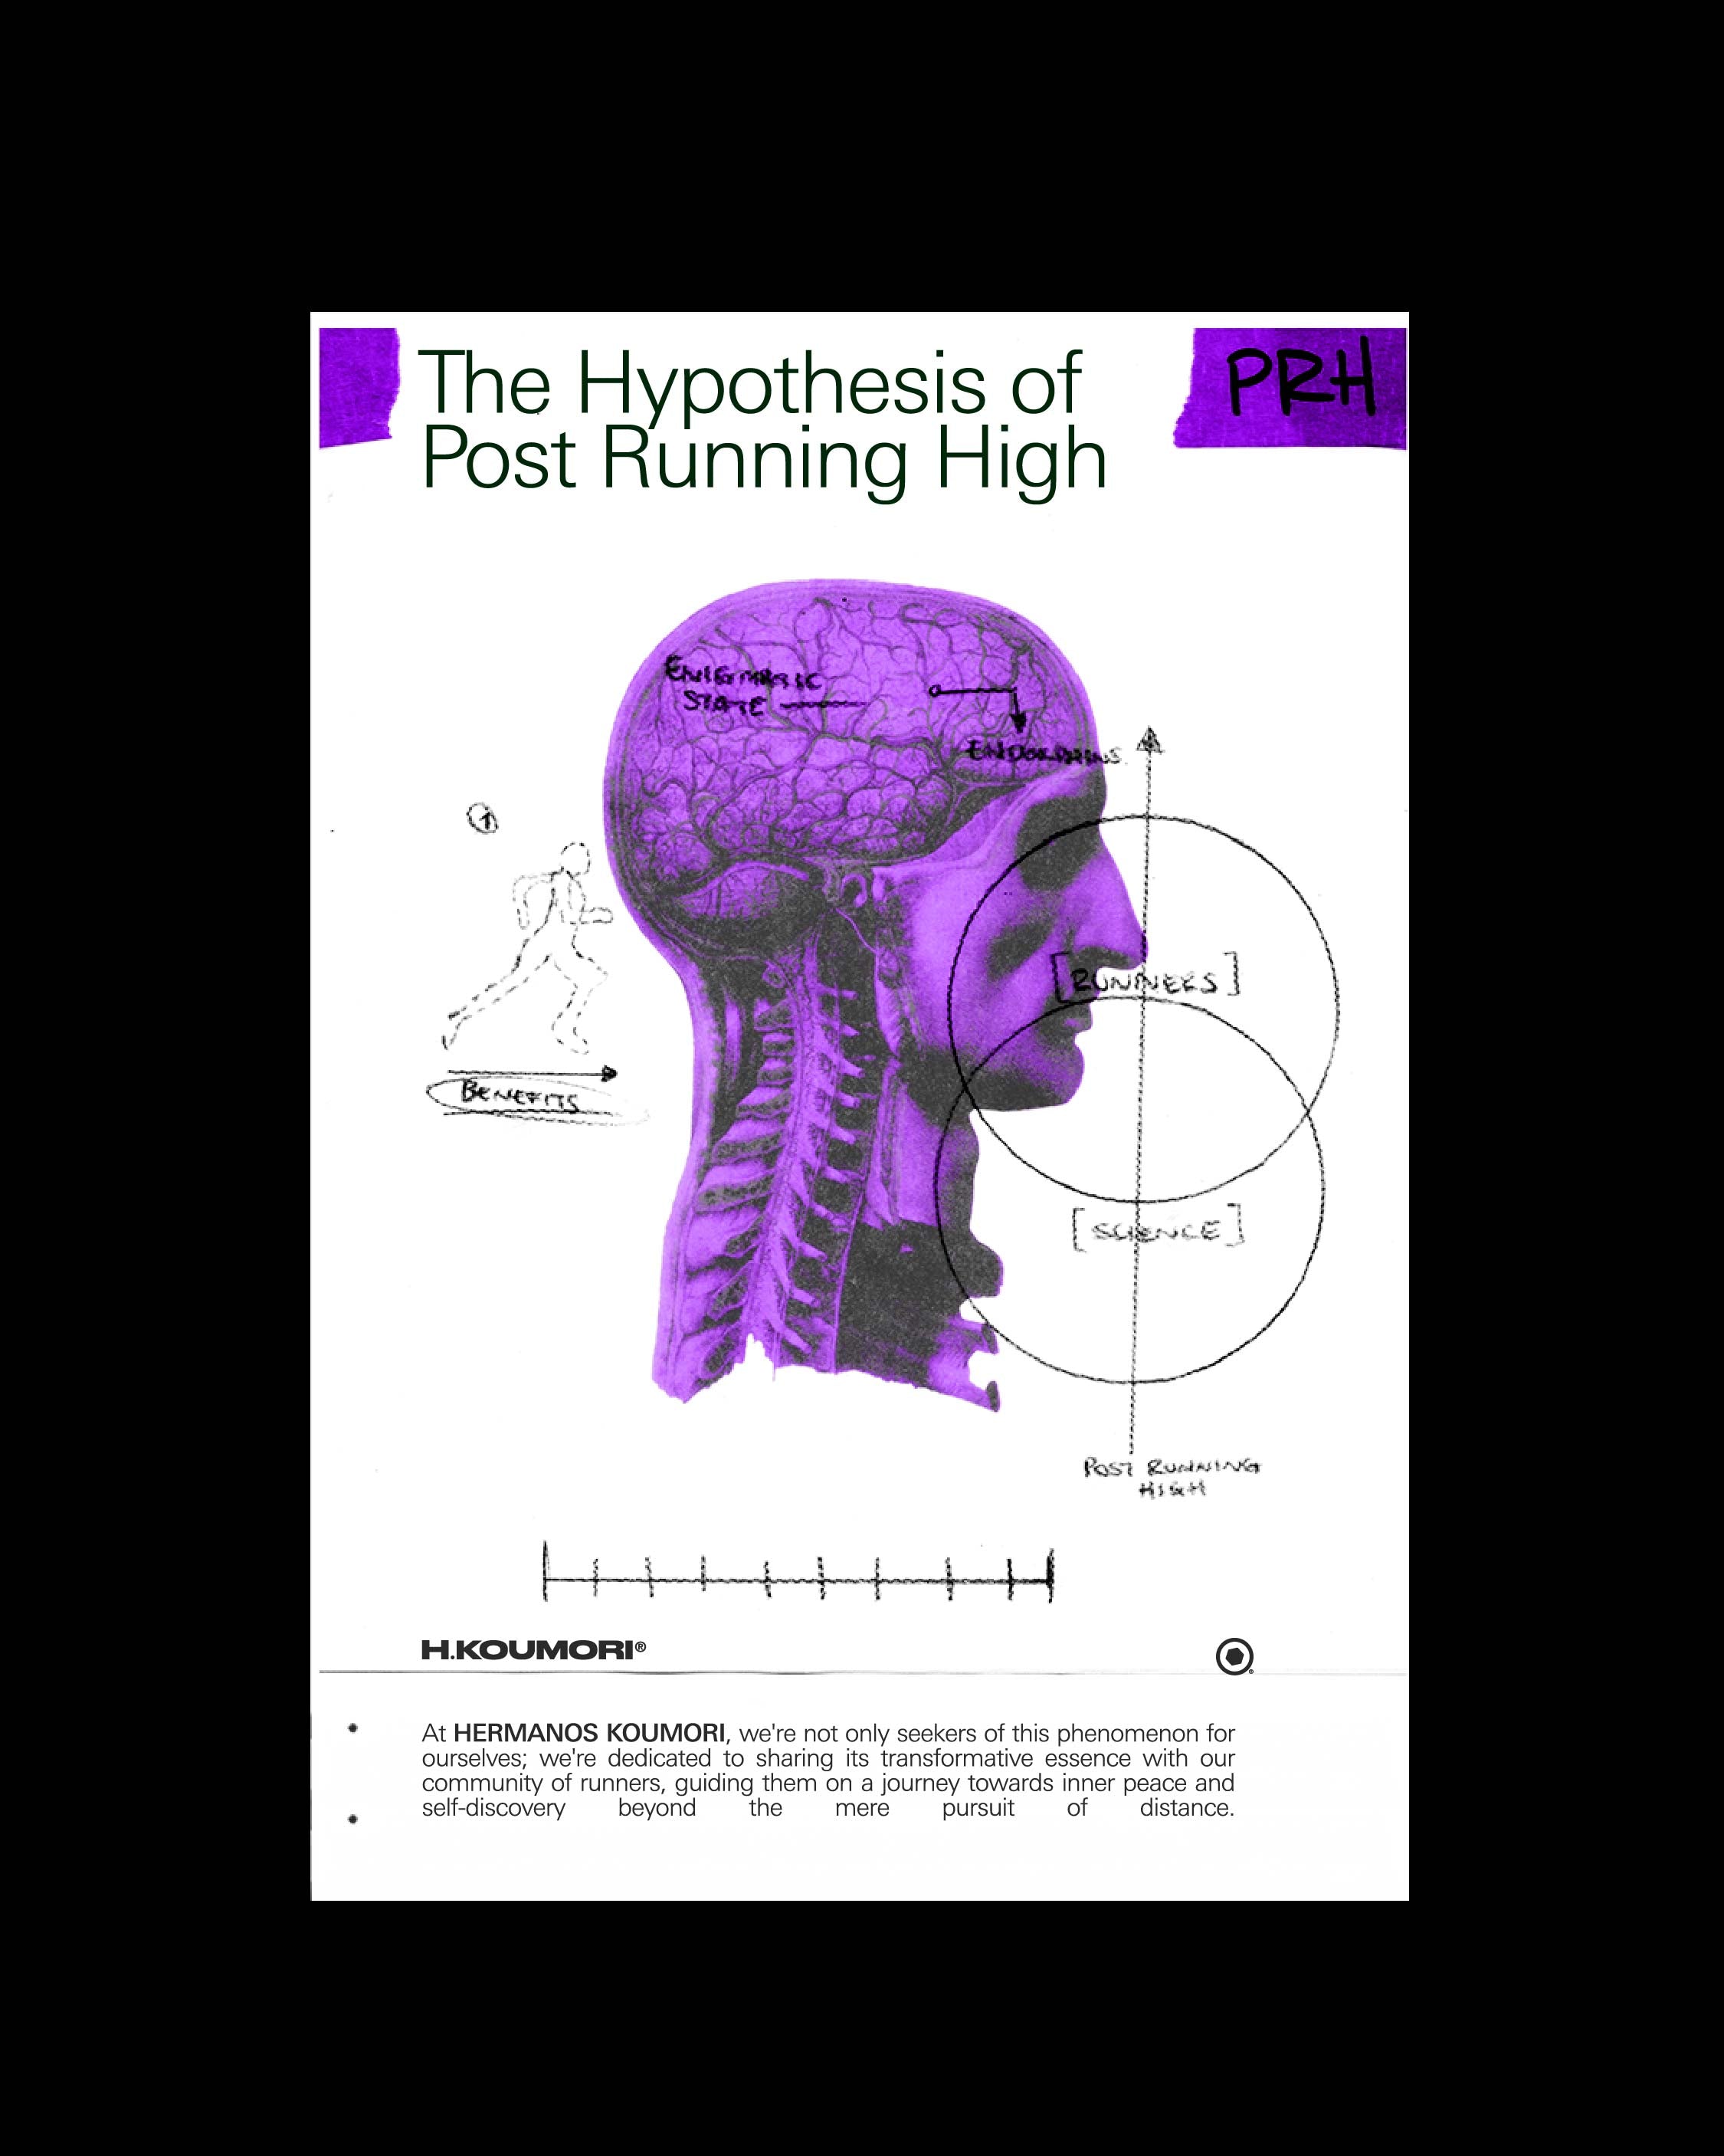 The Hypothesis of Post Running High